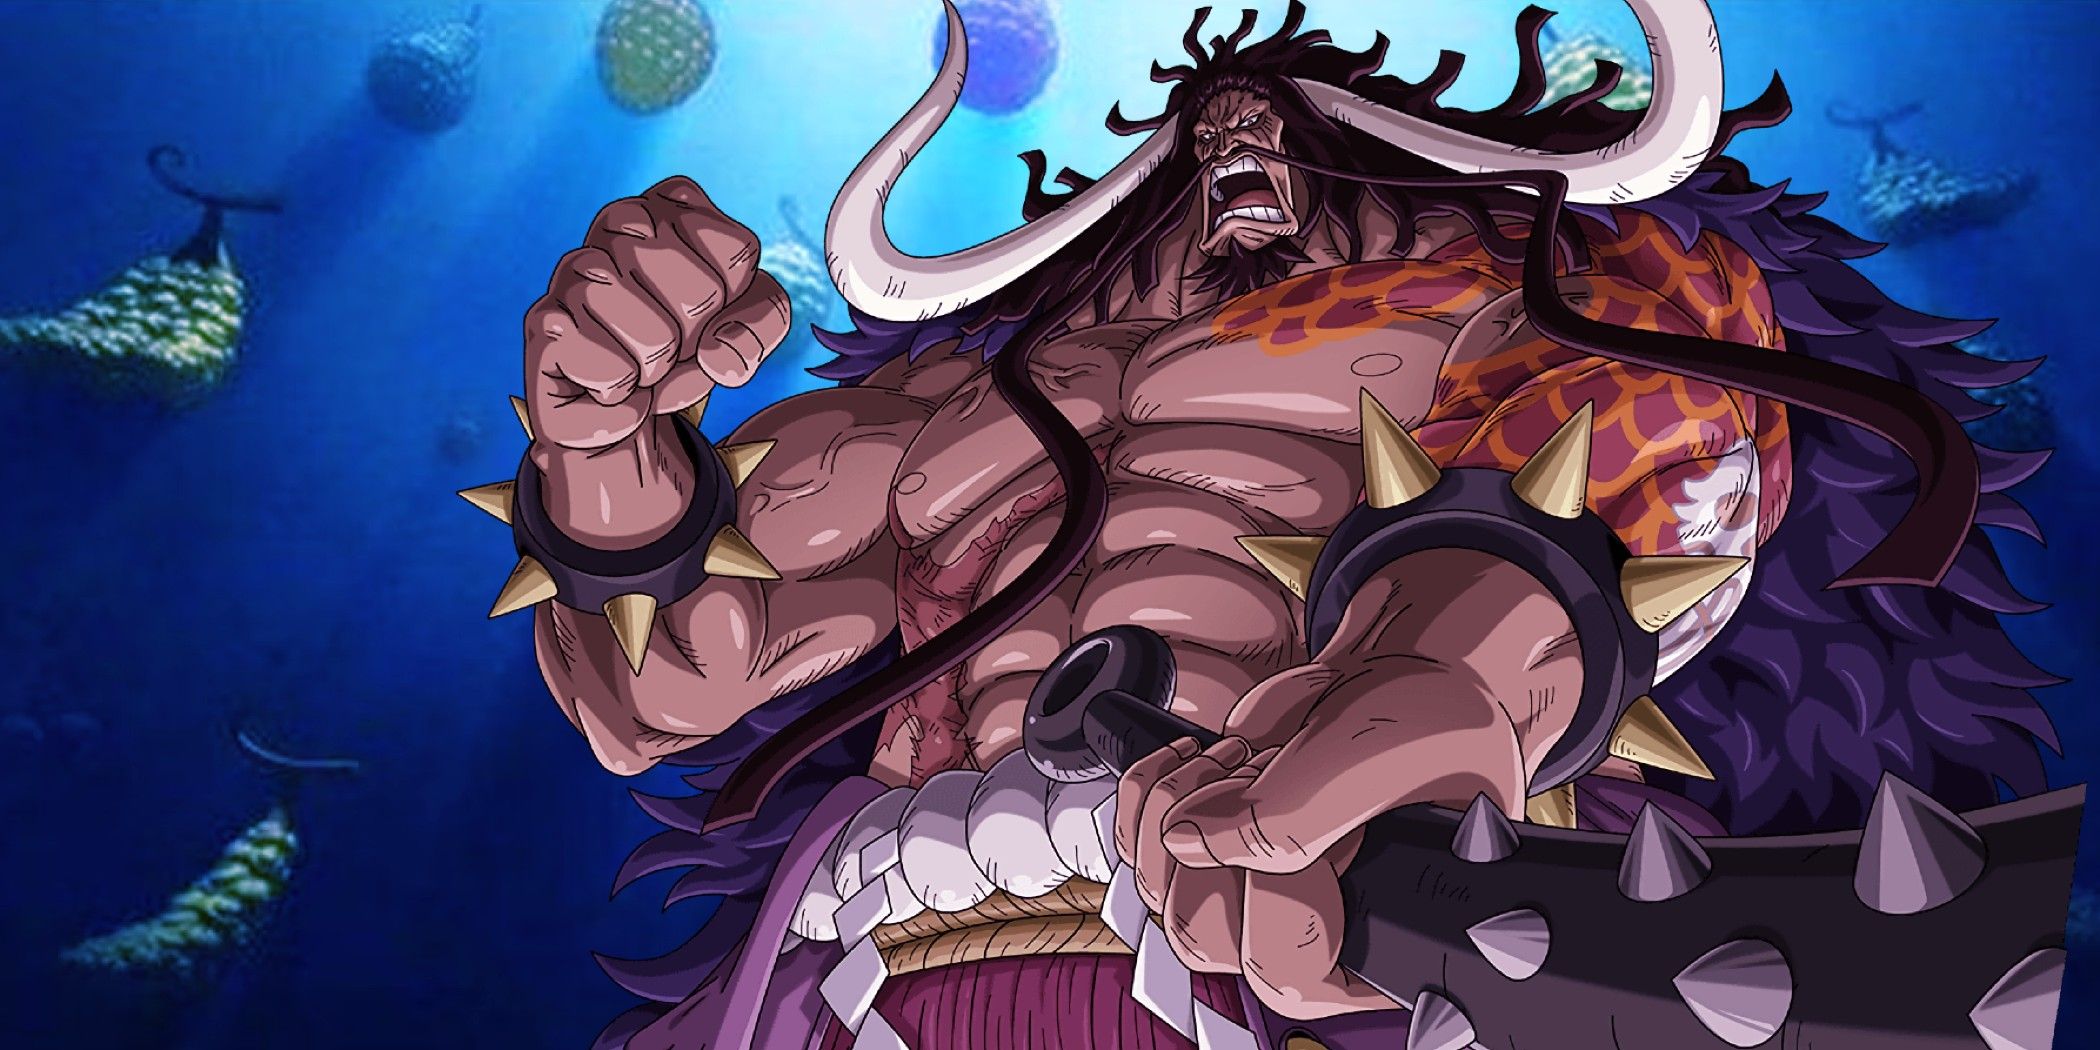 Kaido from One Piece, wielding his weapon in a dynamic pose being surrounded by Devil Fruits.